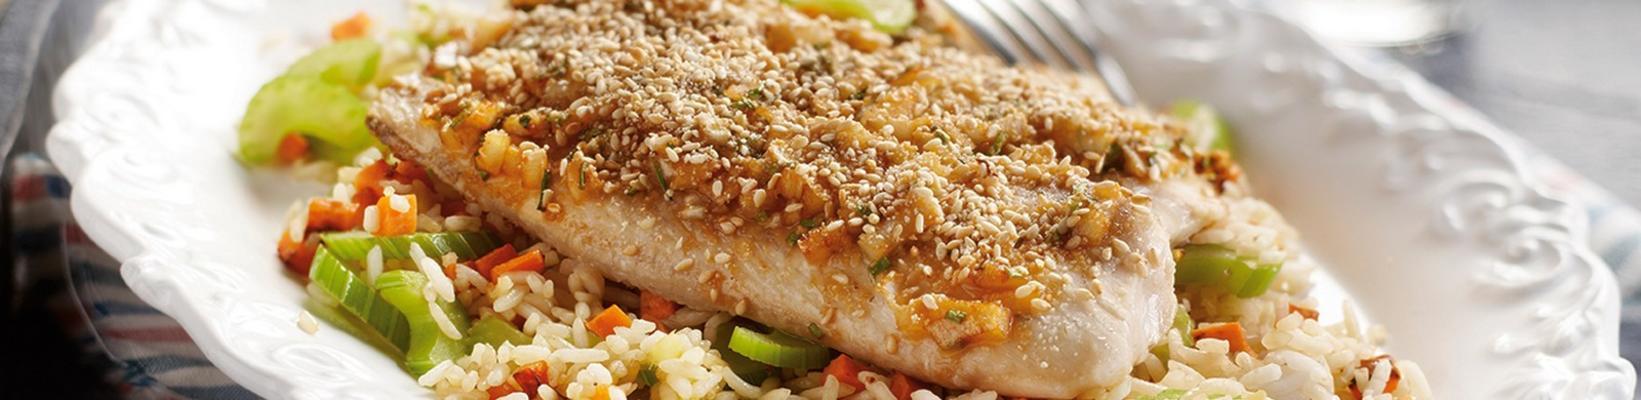 grilled tilapia with chili, sesame and fried rice